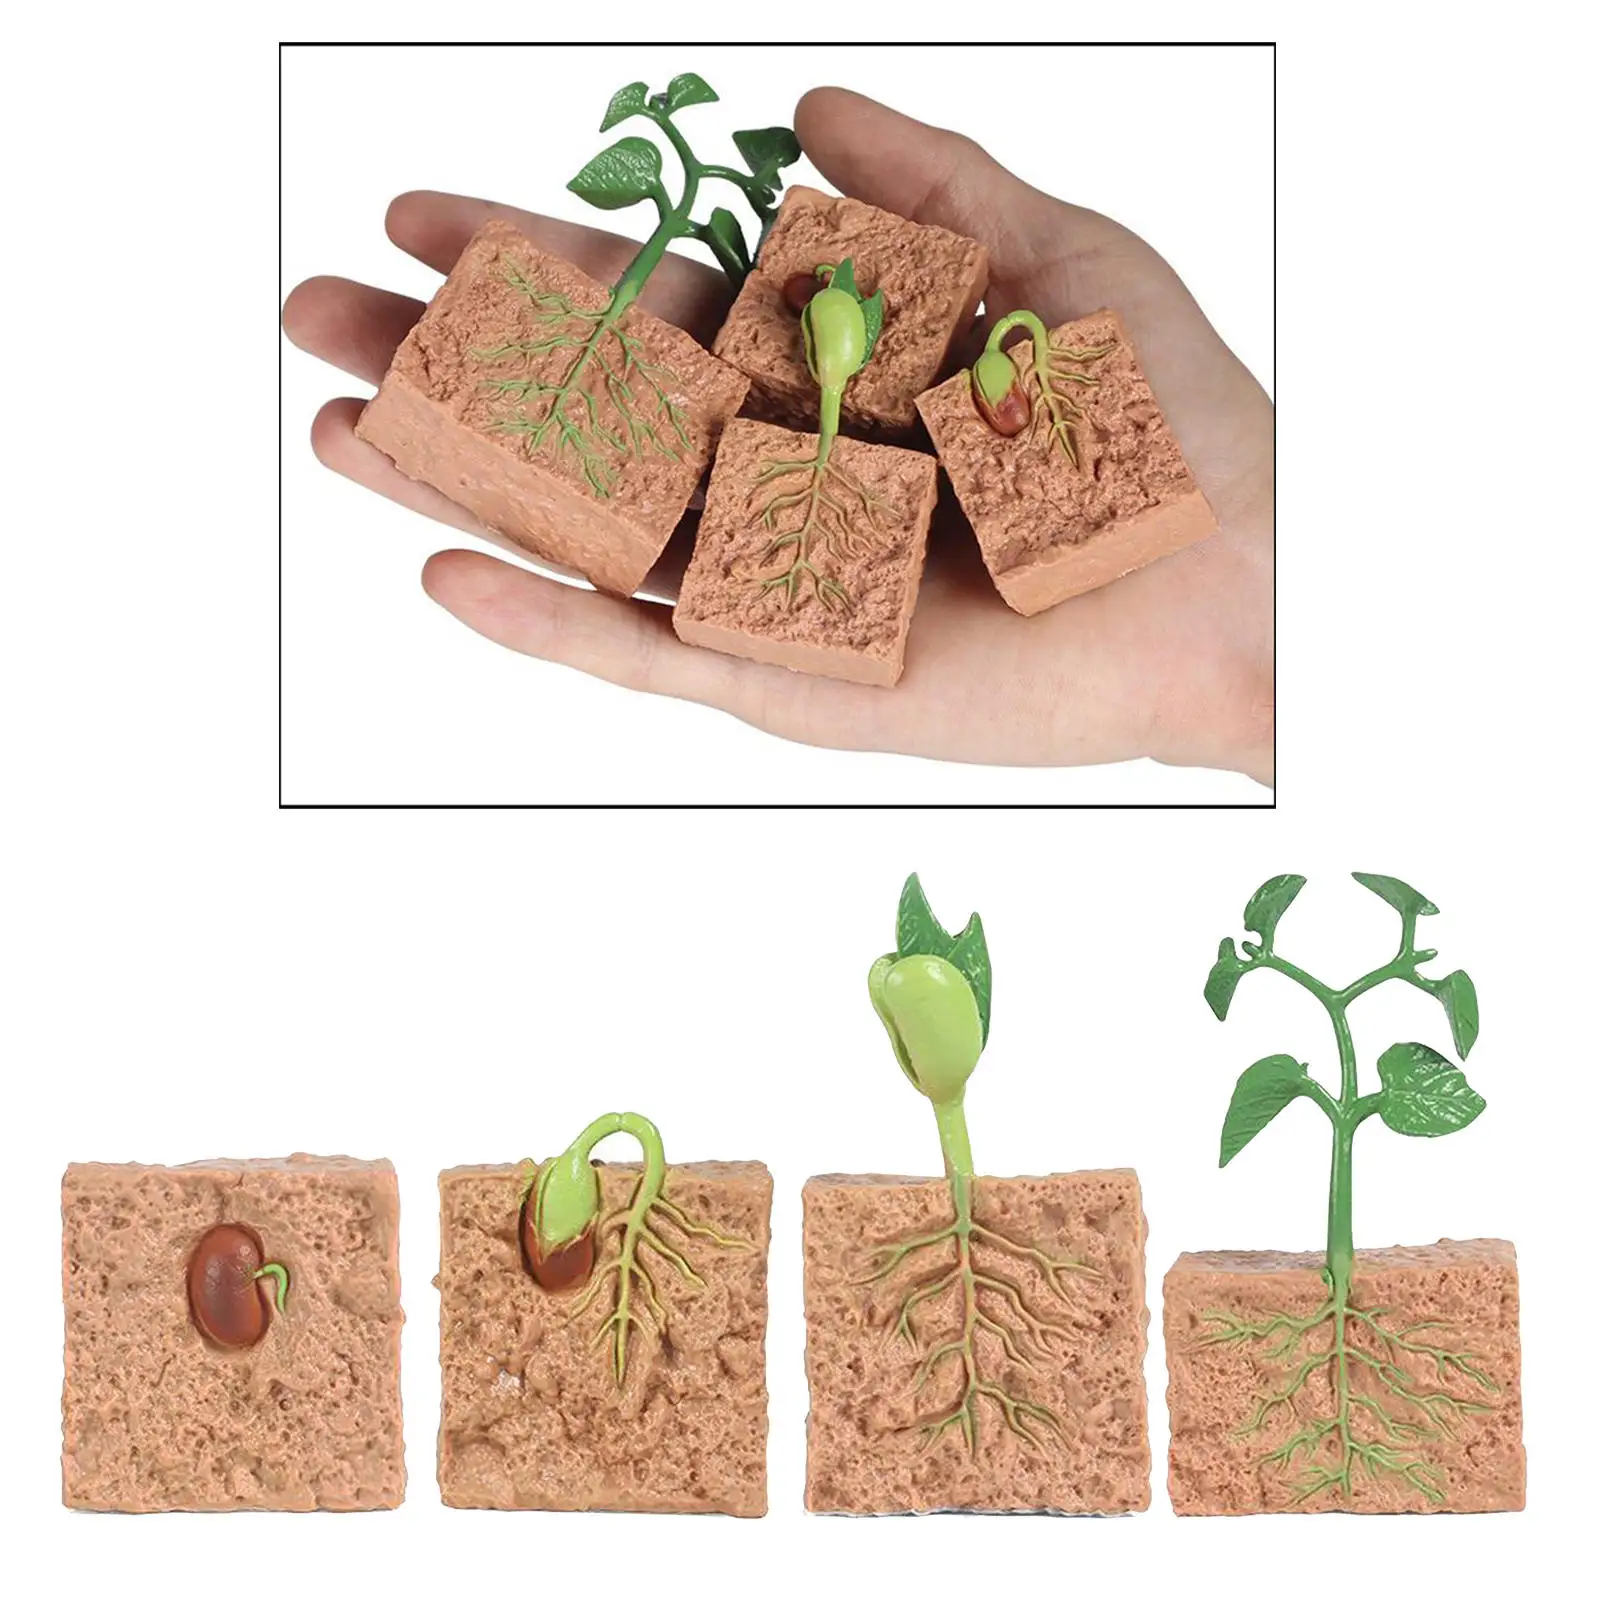 Life Cycle of a Soybeans SeedsNature Plants Life Cycles Growth Model Game PropSimulation Plants Natural Education Toy